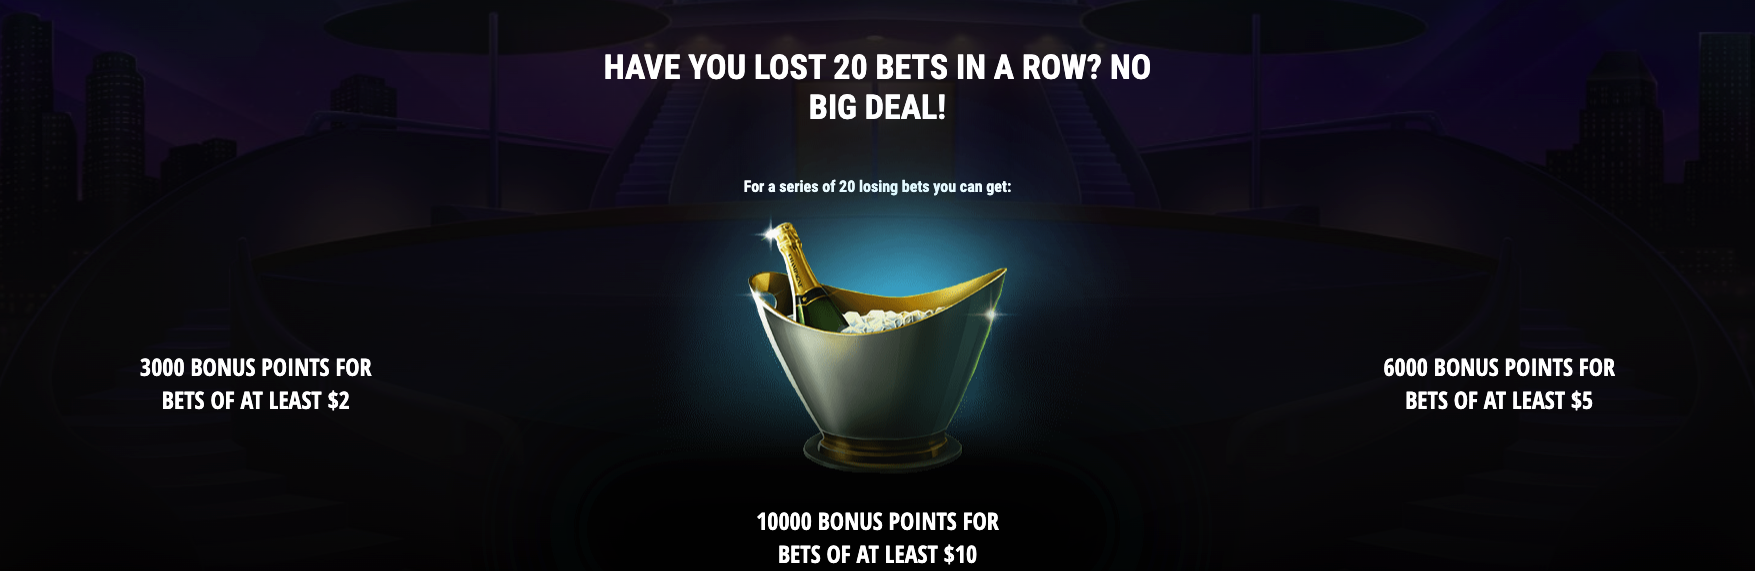 22Bet bonus for a series of losing bets